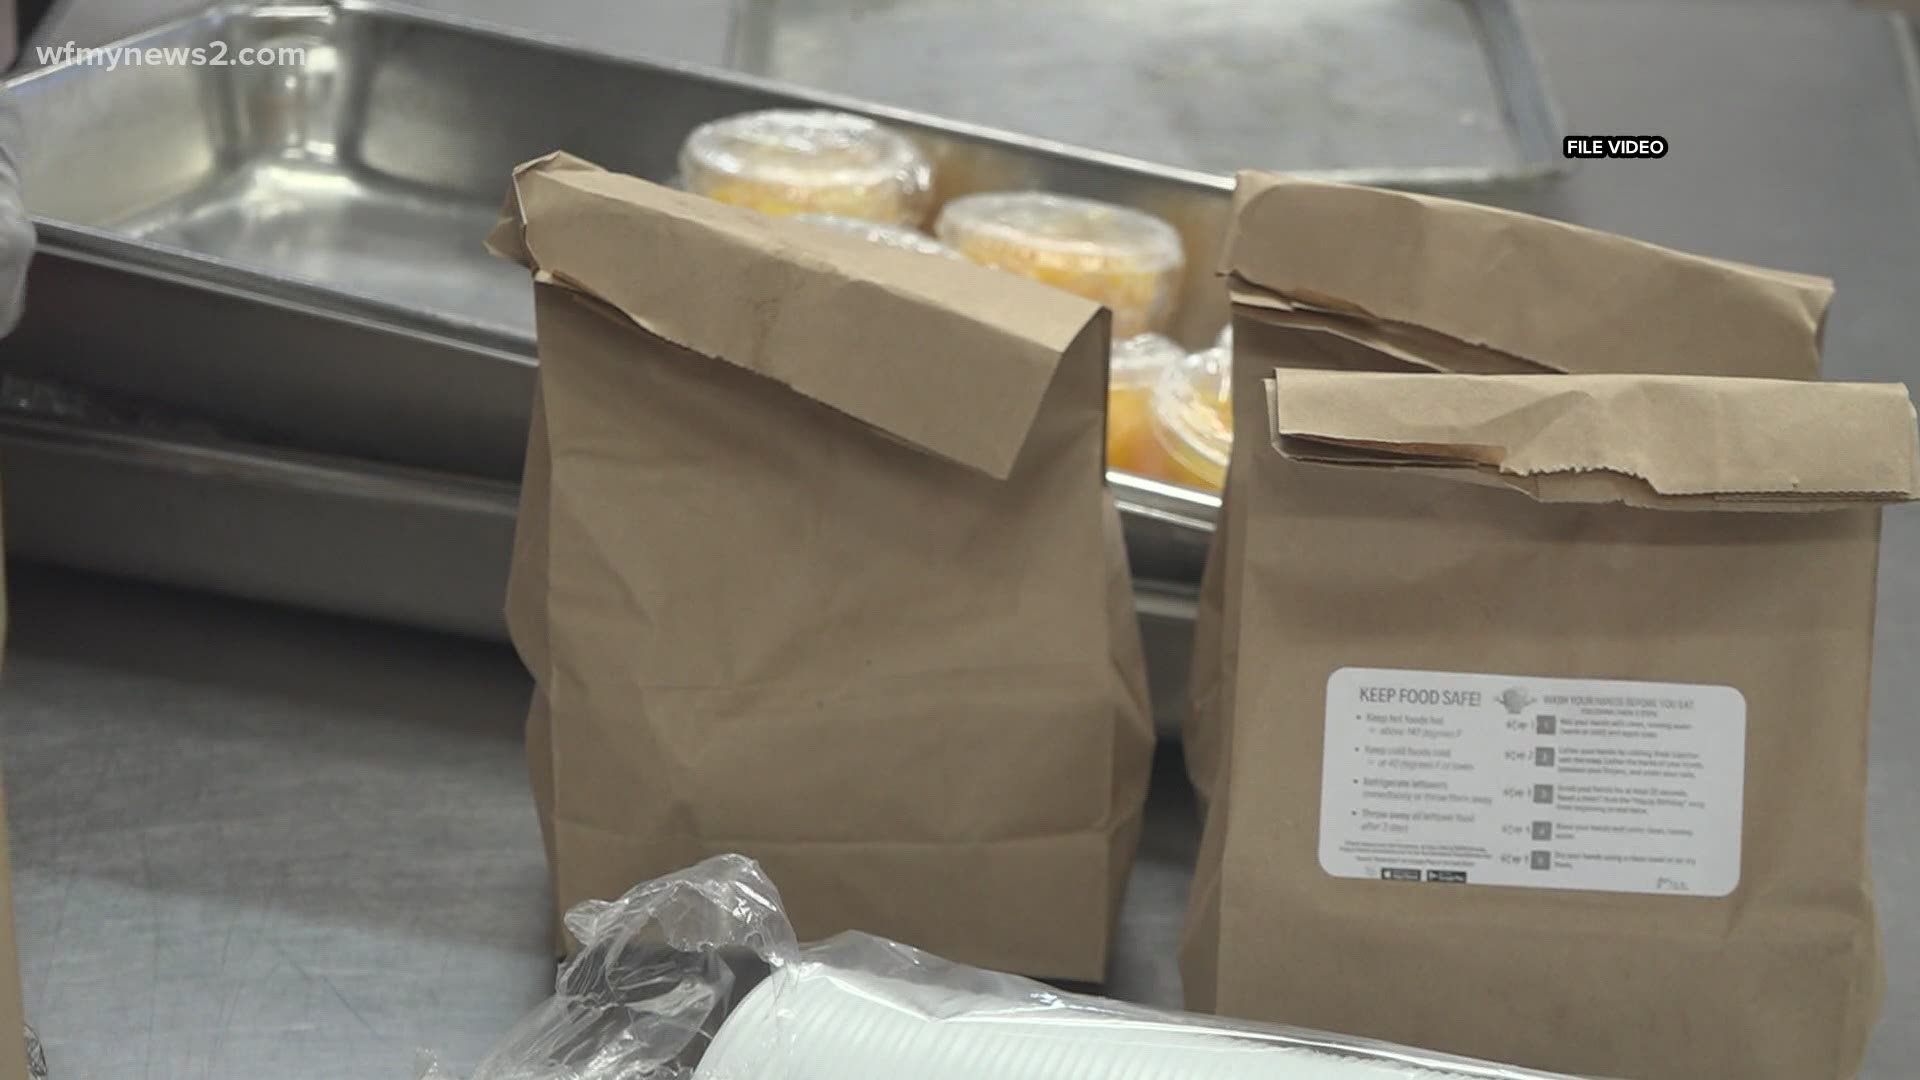 Guilford County Schools needs Congress to extend a waiver that allows for free meal distribution.